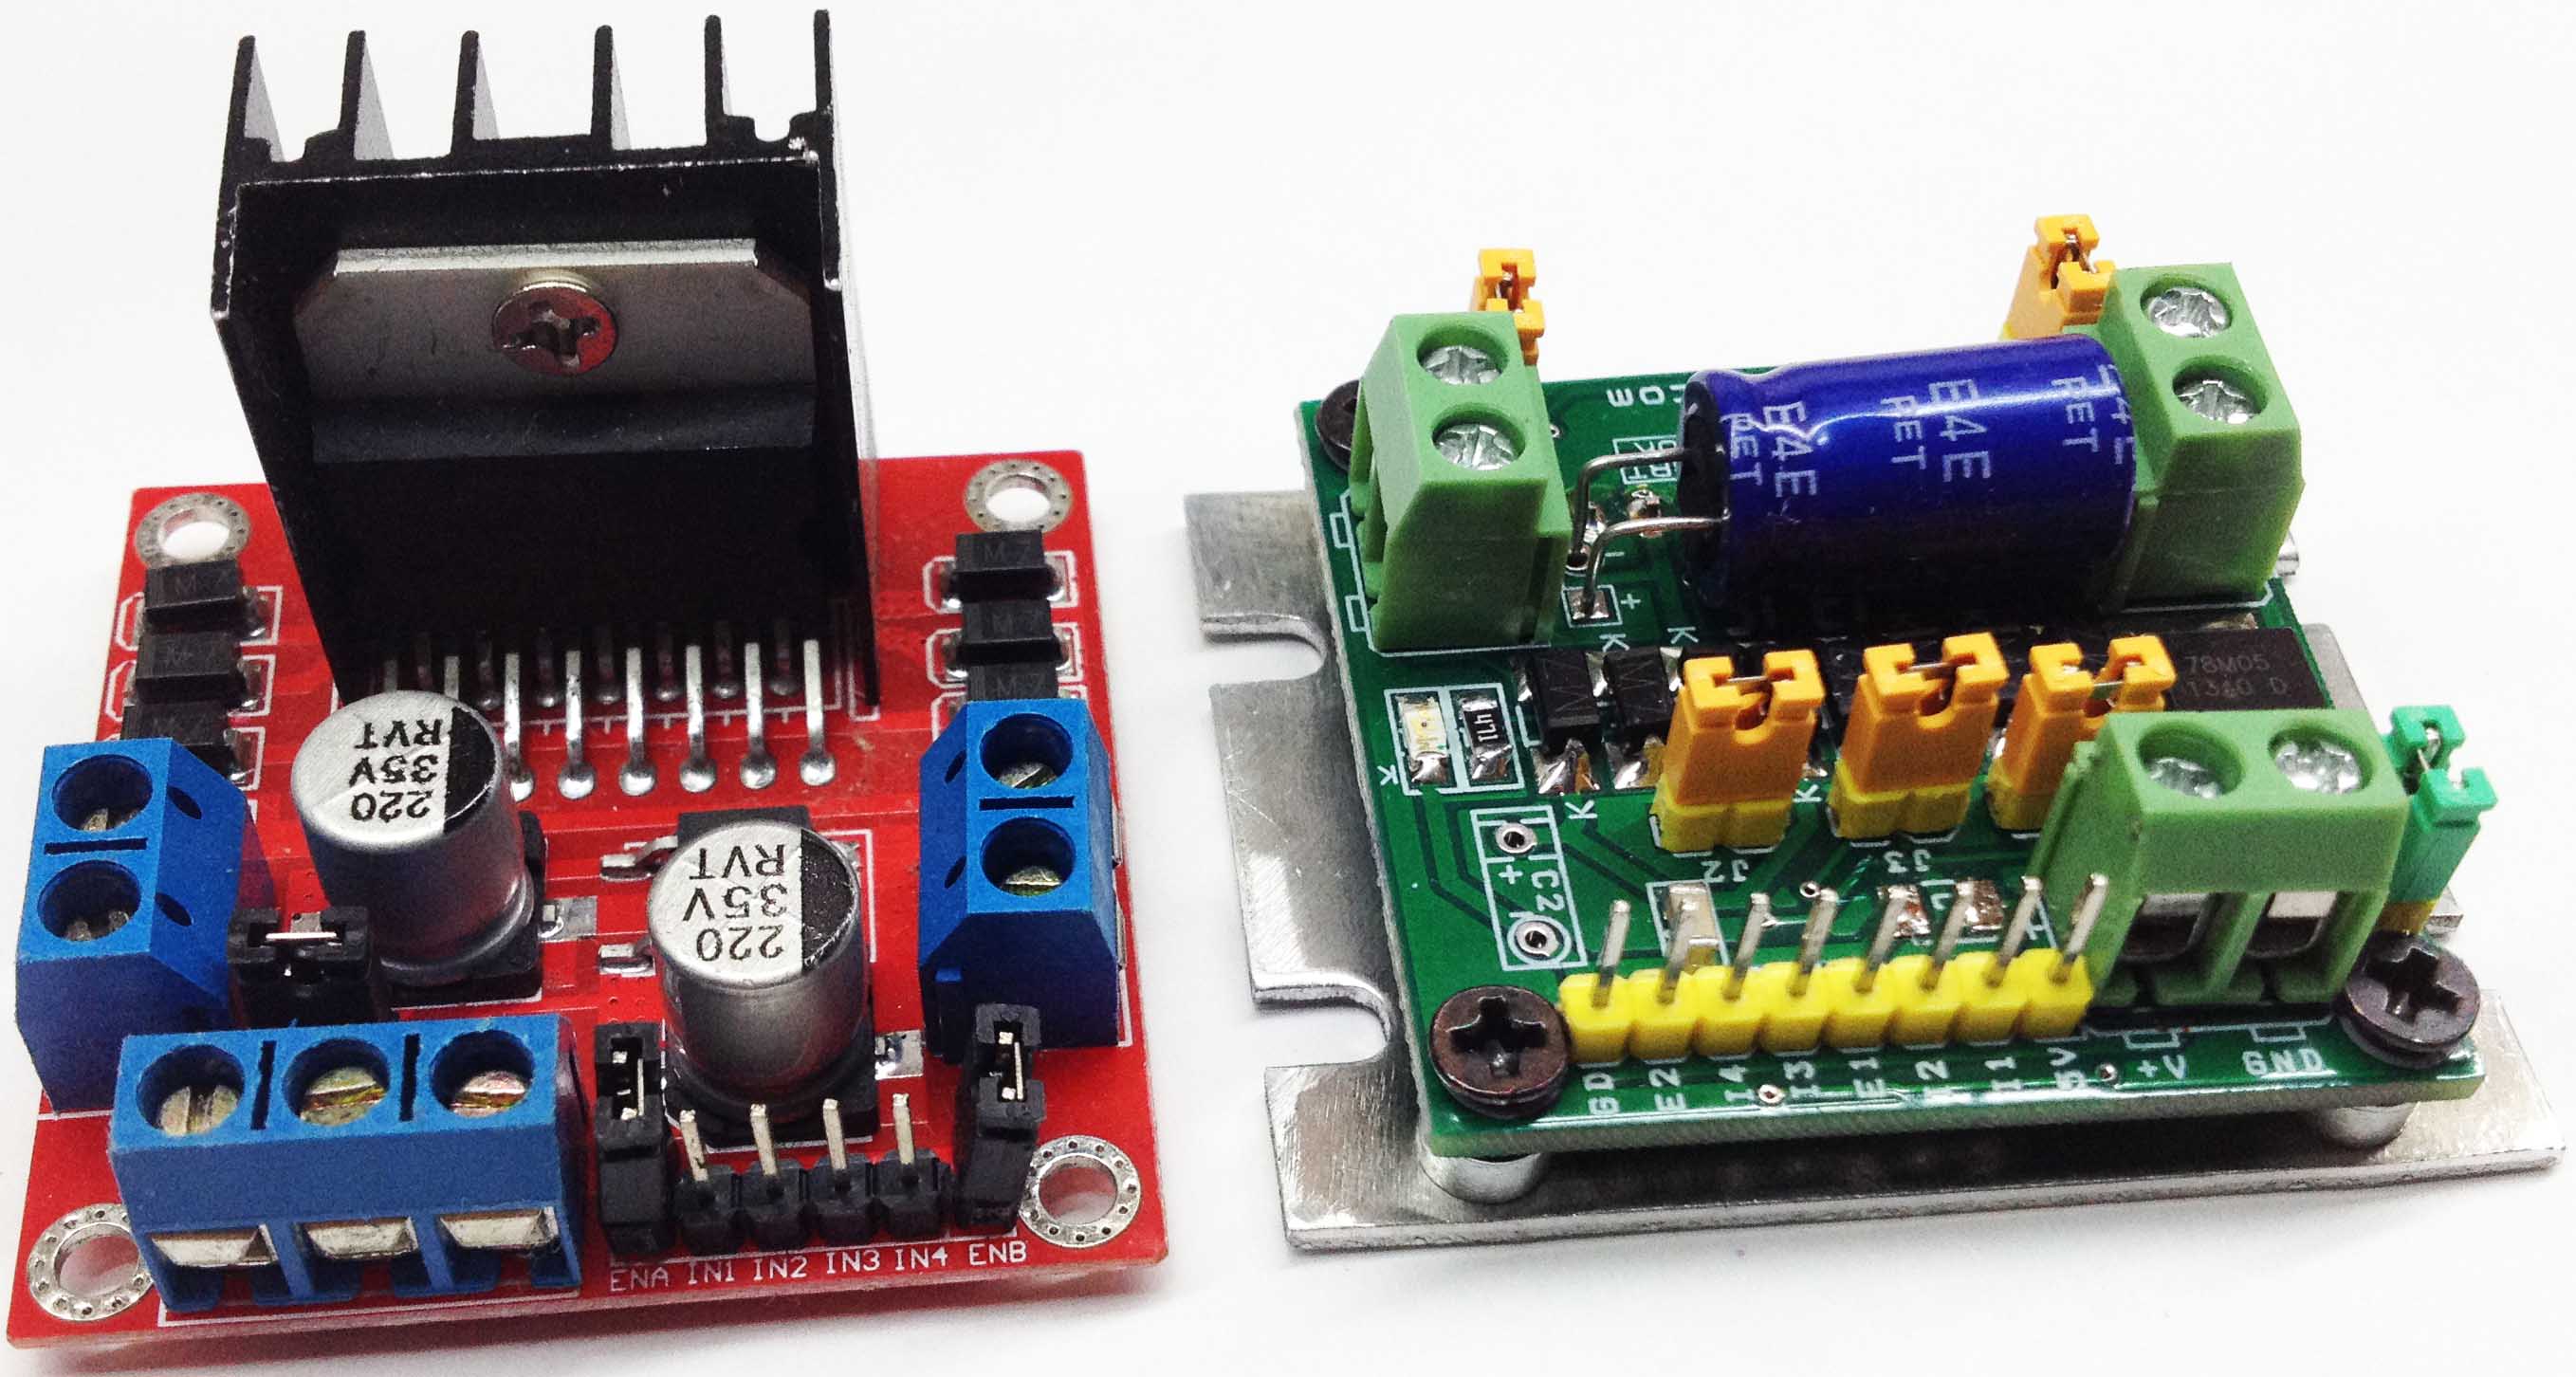 L298 DC MOTOR DRIVER BOARD WITH TWO OR SINGLE MOTOR DRIVE OPTION AND ON BOARD 7805 REGULATOR (6)